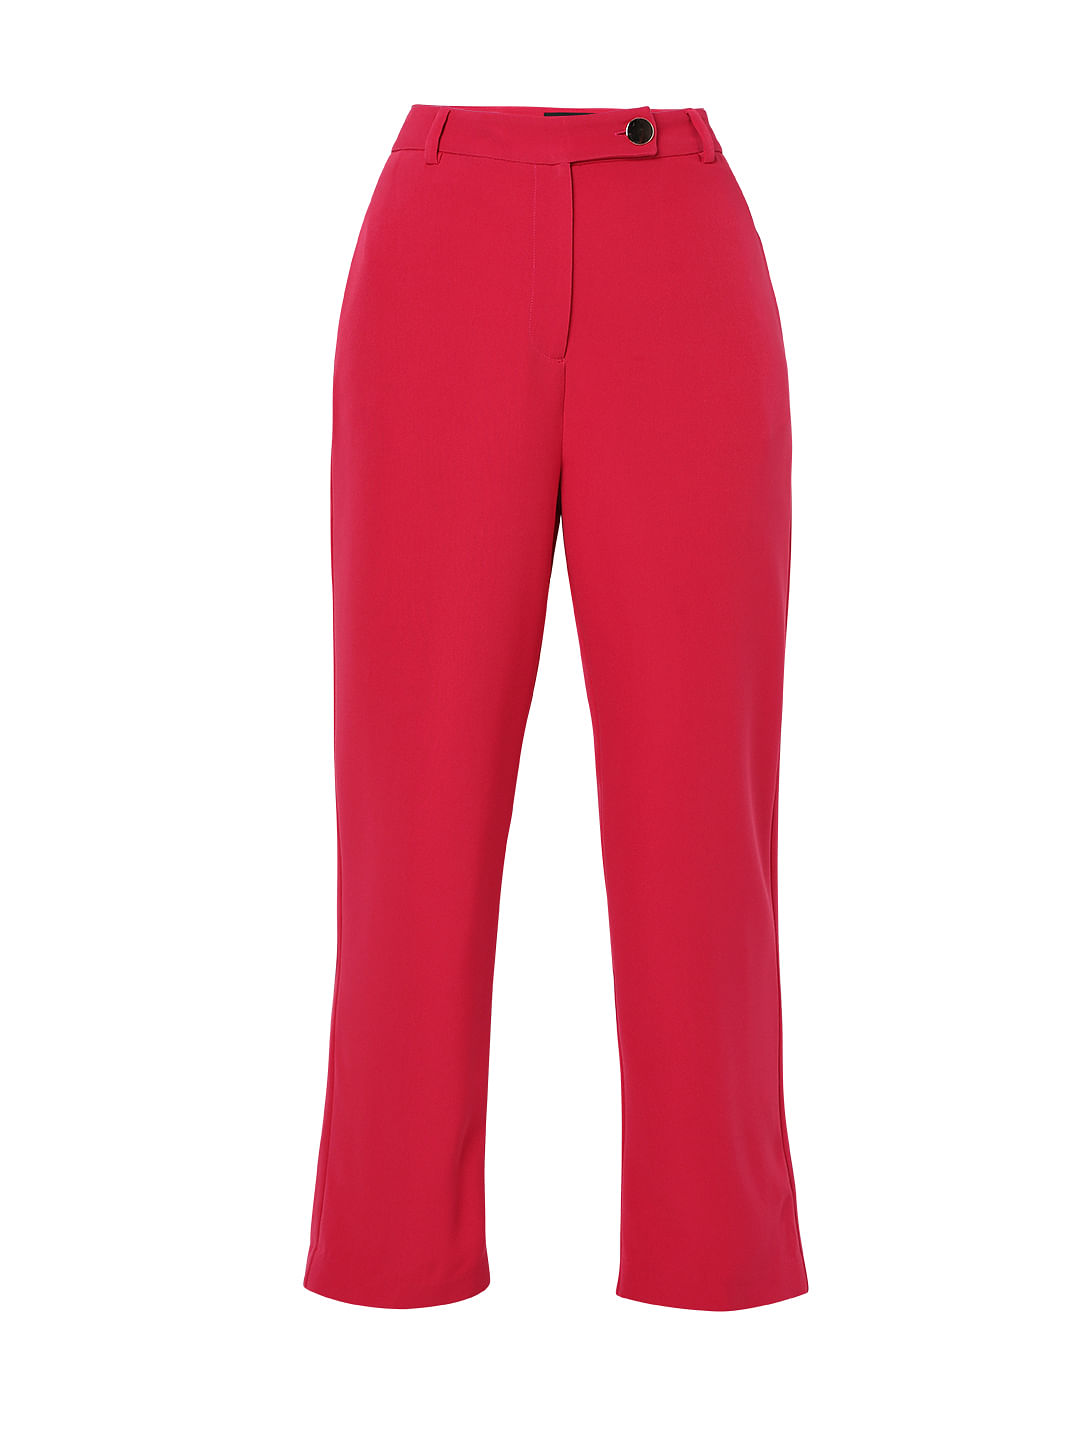 White Shirt In High Waist Red Pant Outfits For Women on Stylevore